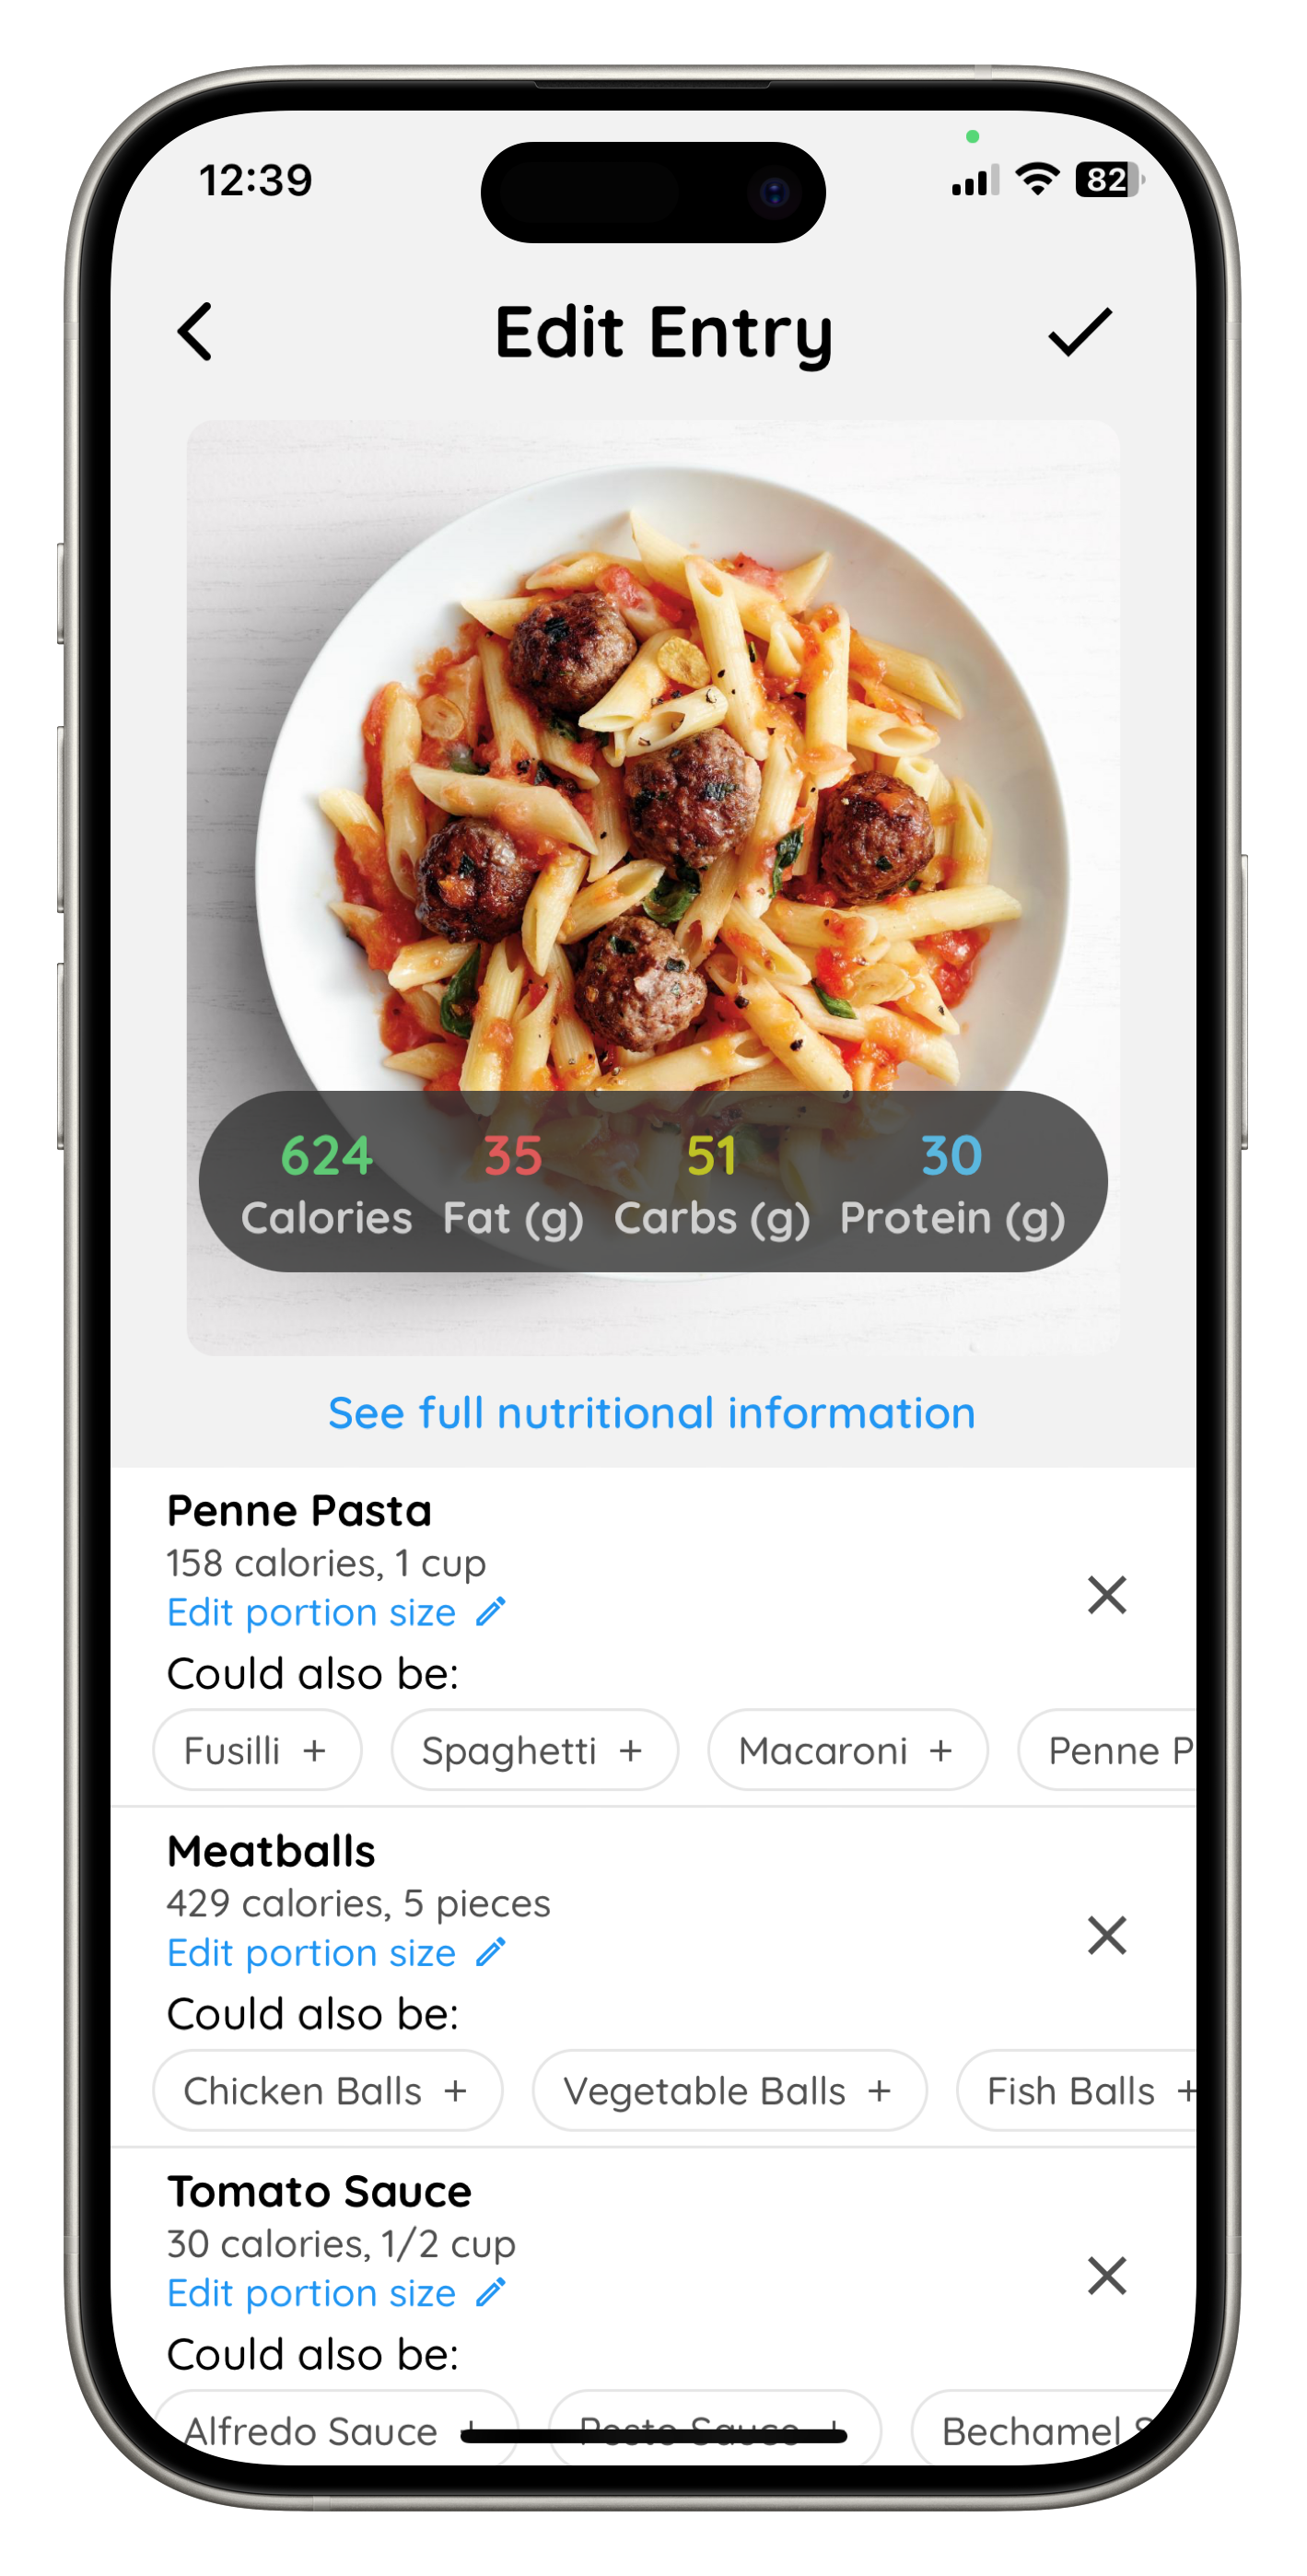 Screenshot of SnapCalorie's results from taking a picture of a plate of pasta and meatballs.